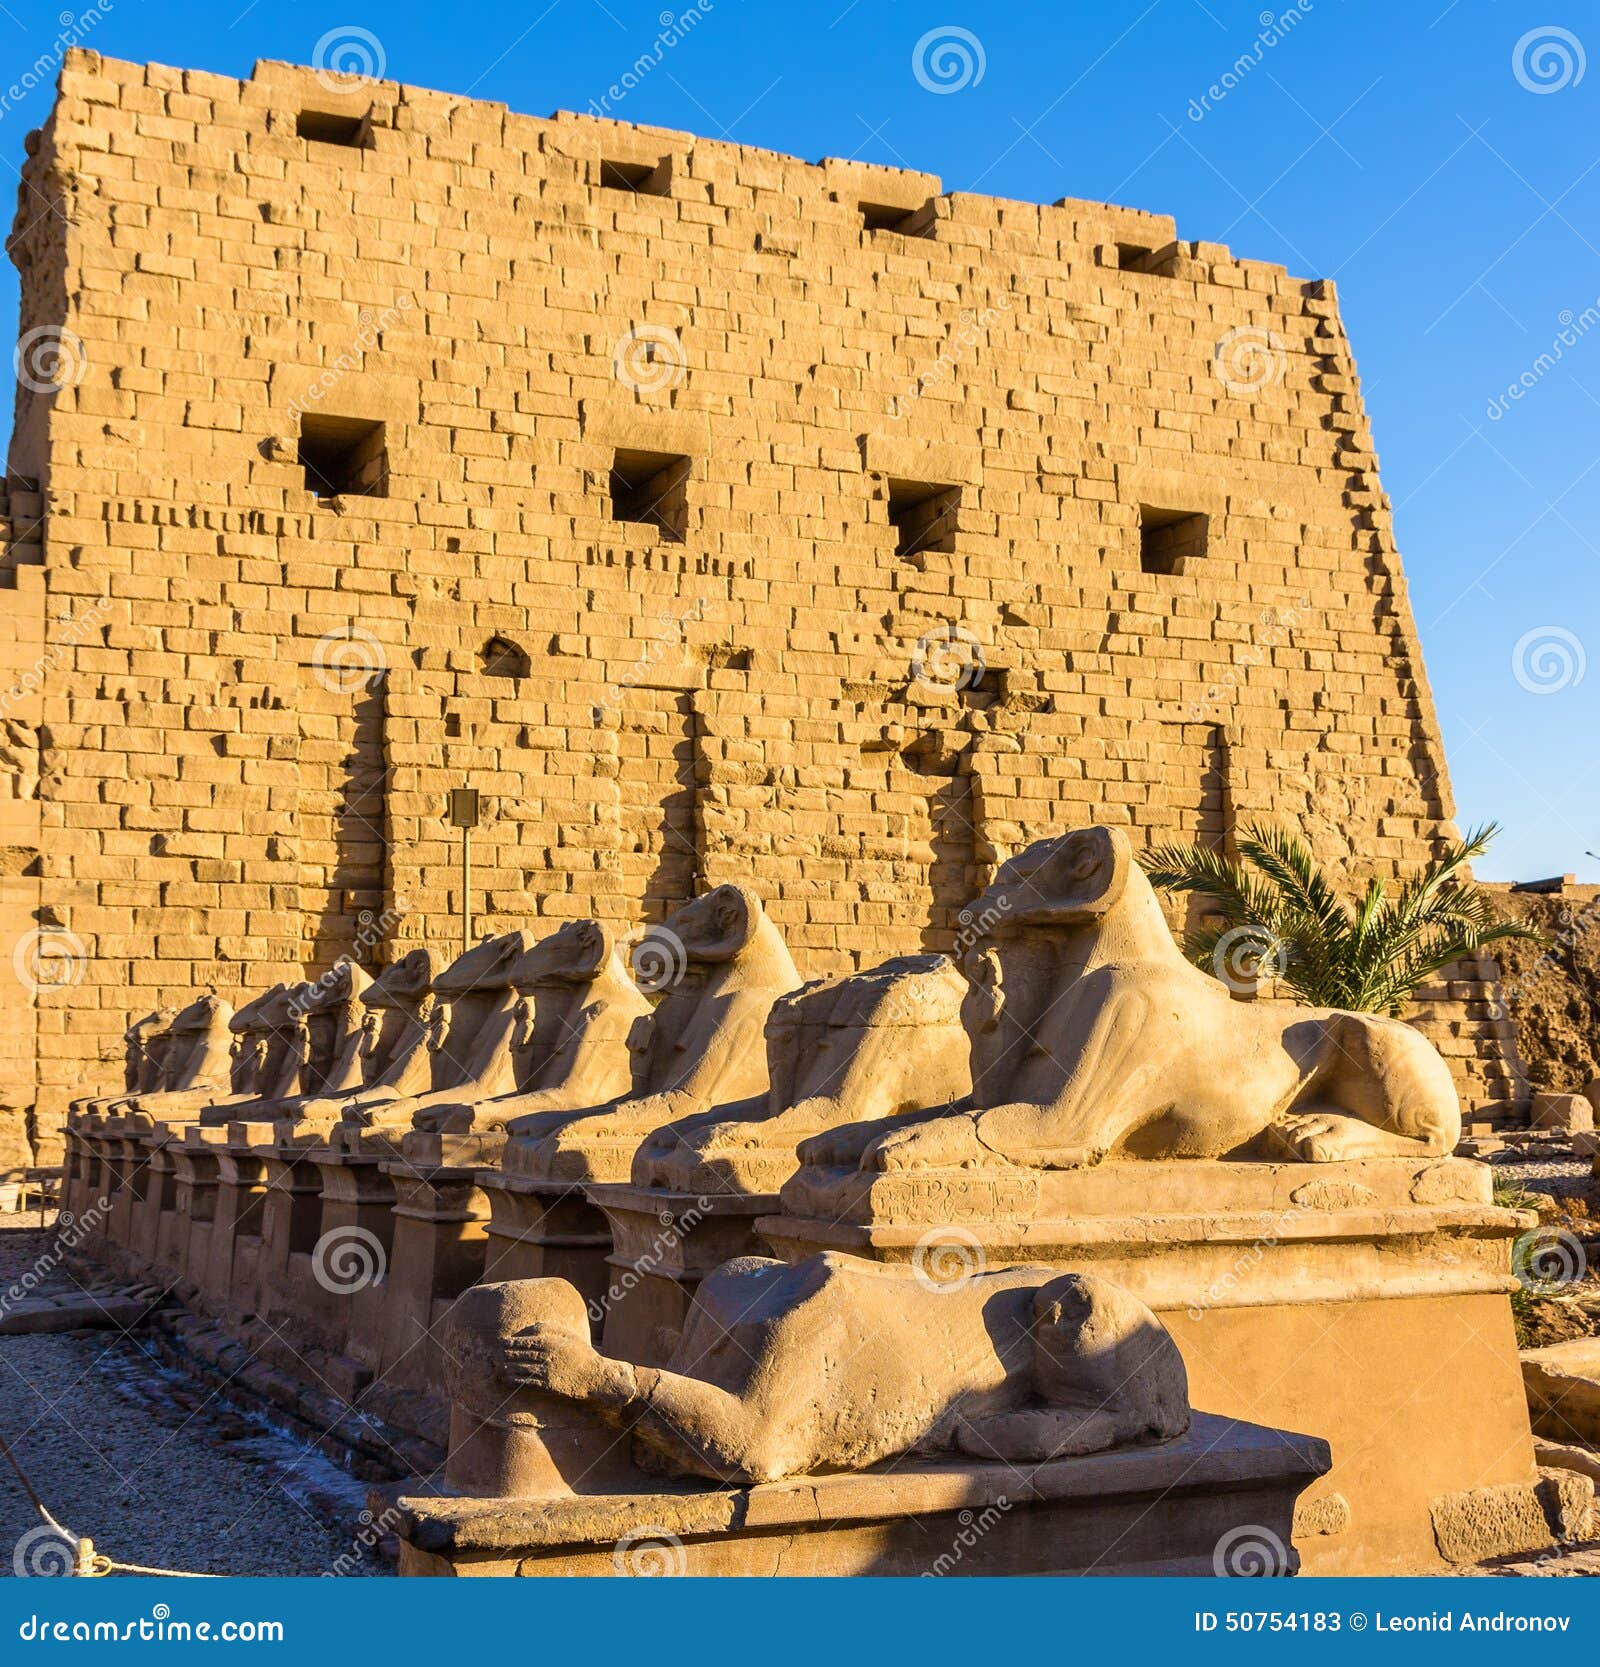 sphinxes at the entrance of the karnak temple - luxor